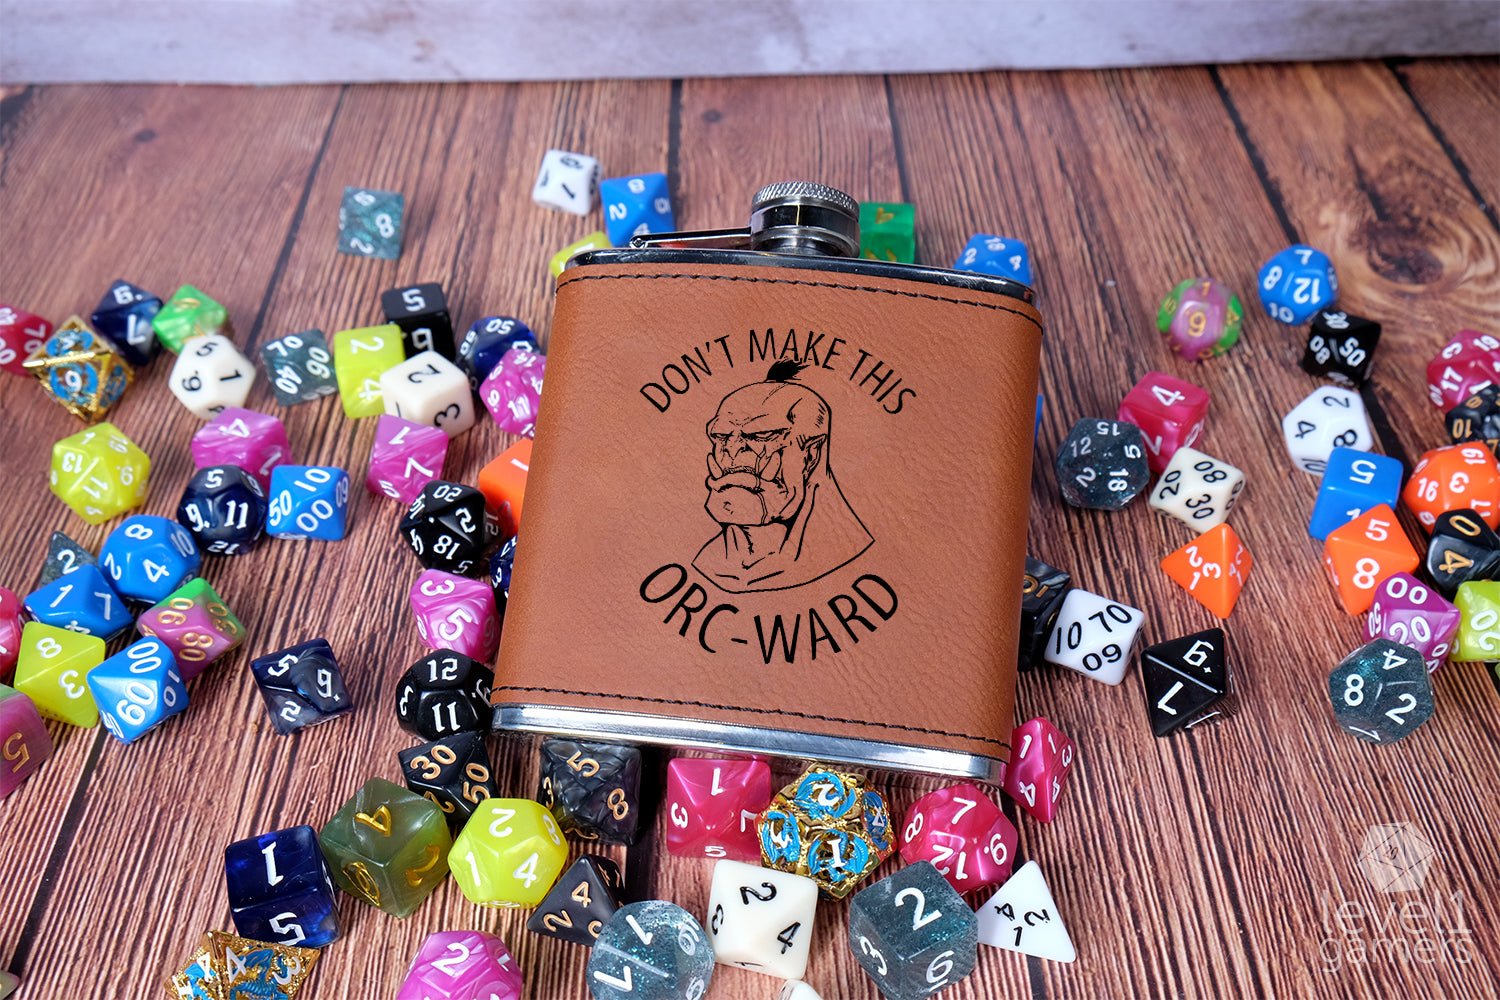 Orc-Ward Flask  Level 1 Gamers   